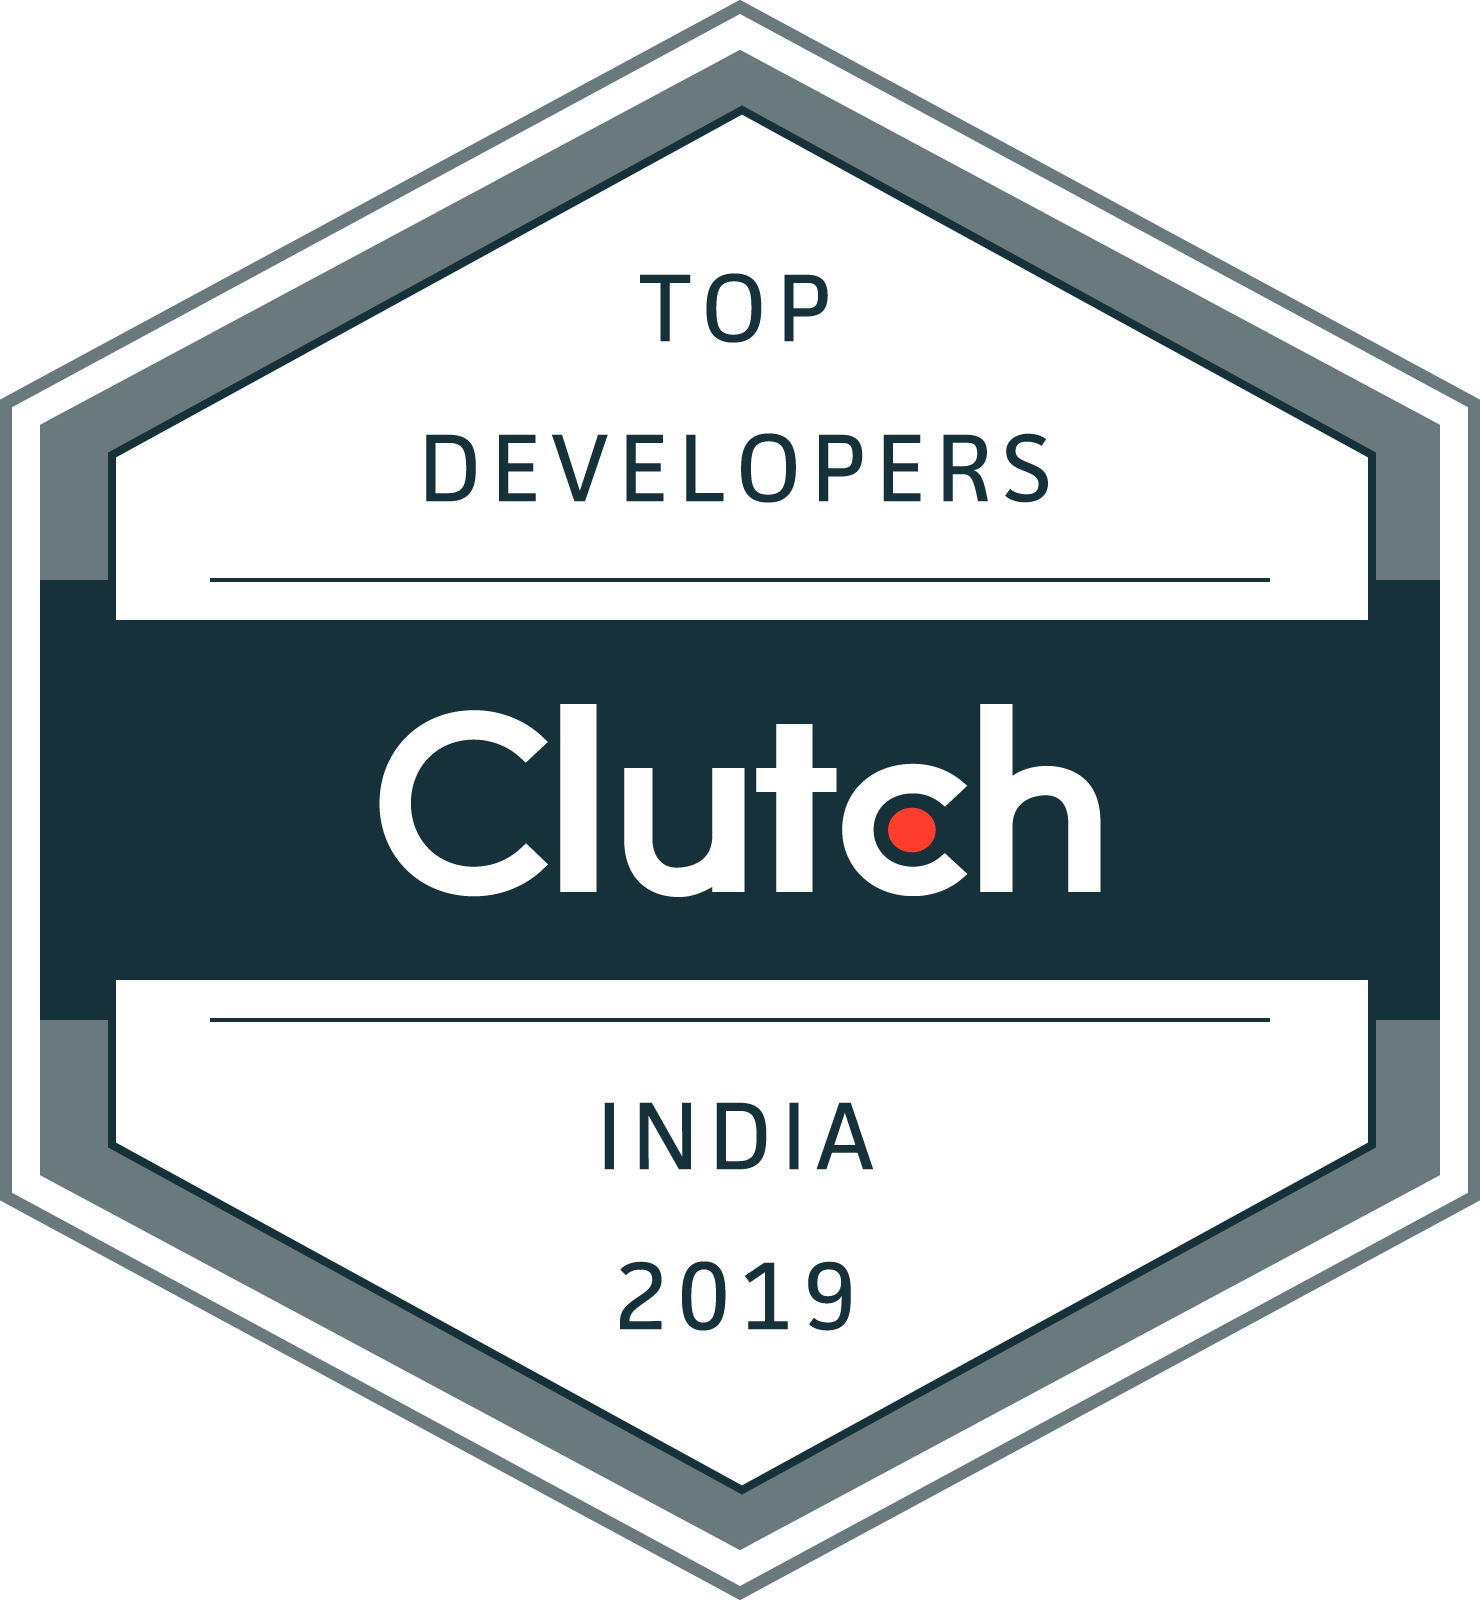 Clutch logo for top developers in India in 2019